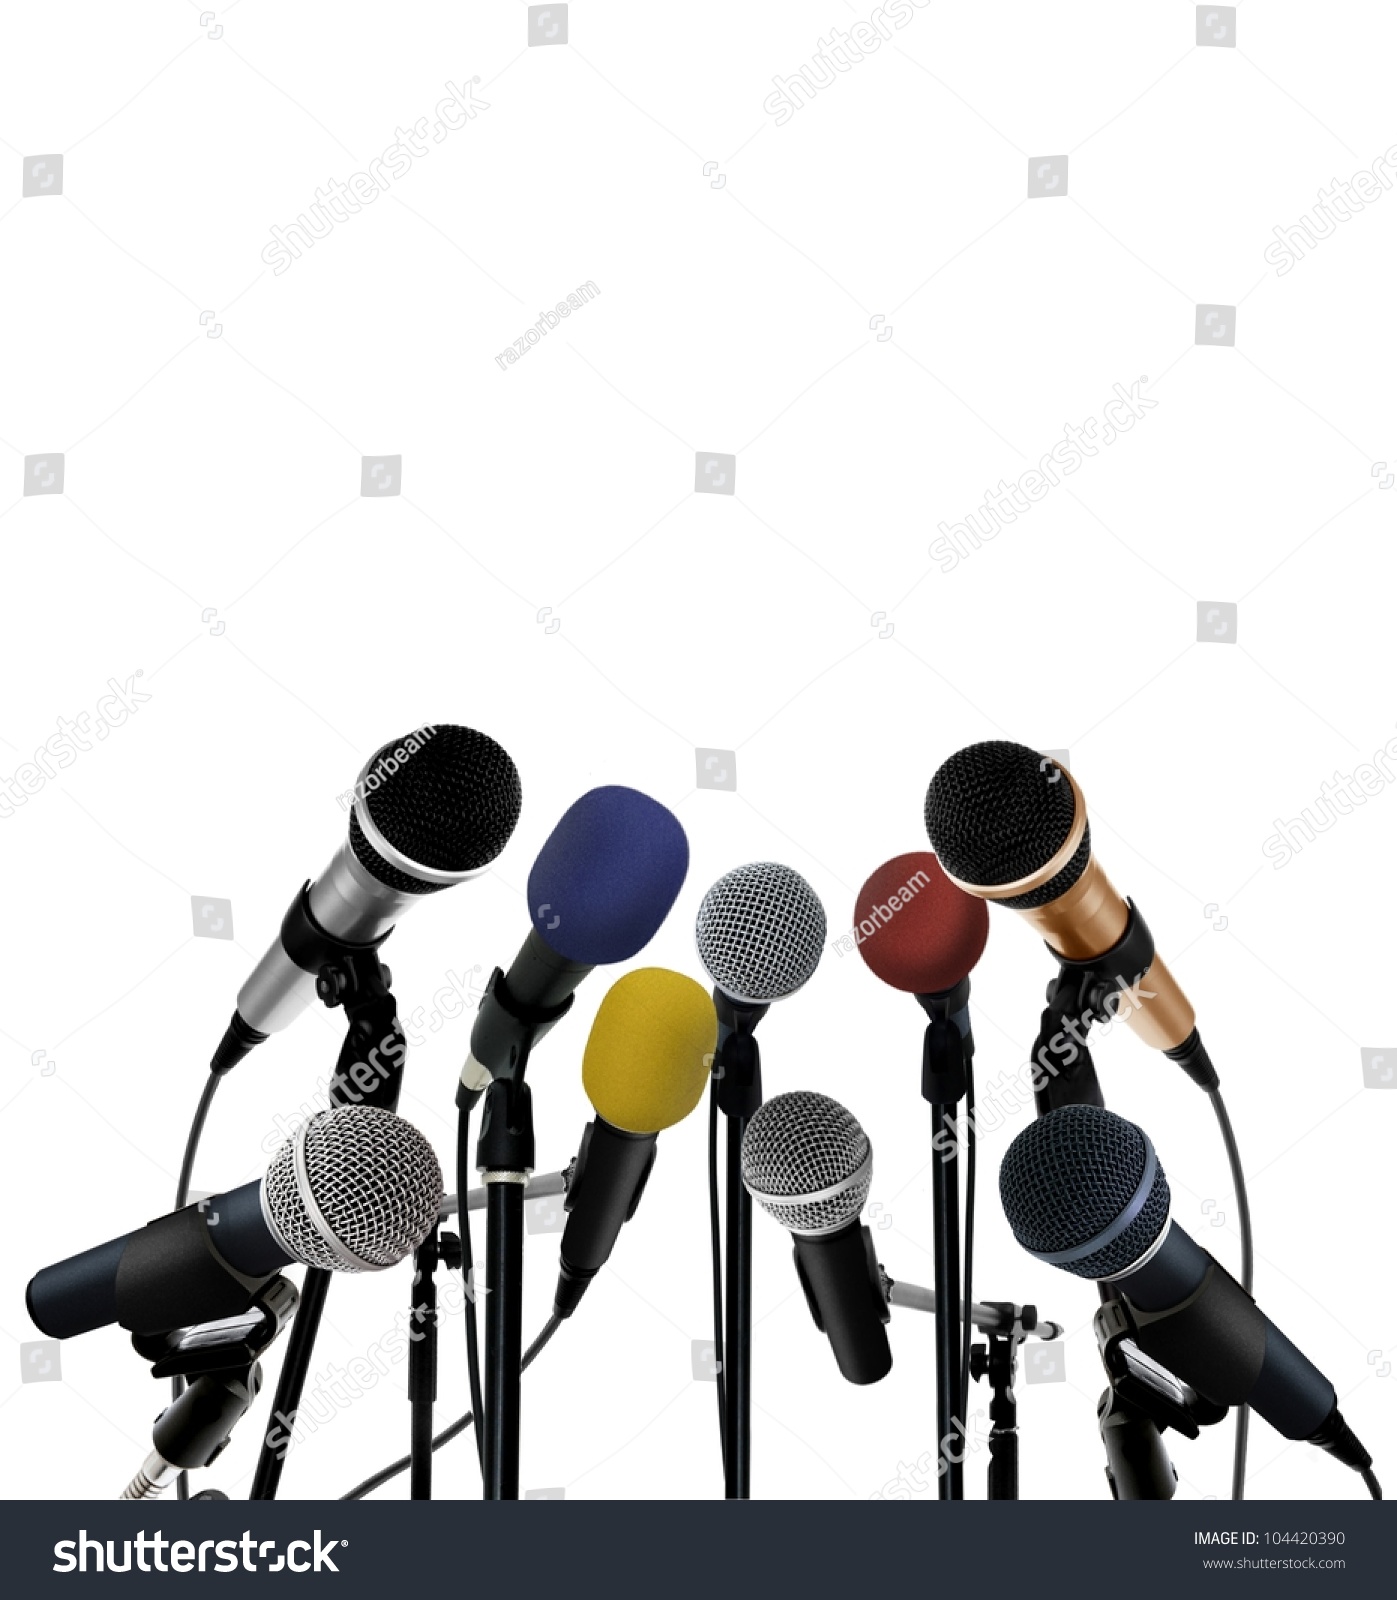 Press conference with standing microphones #104420390